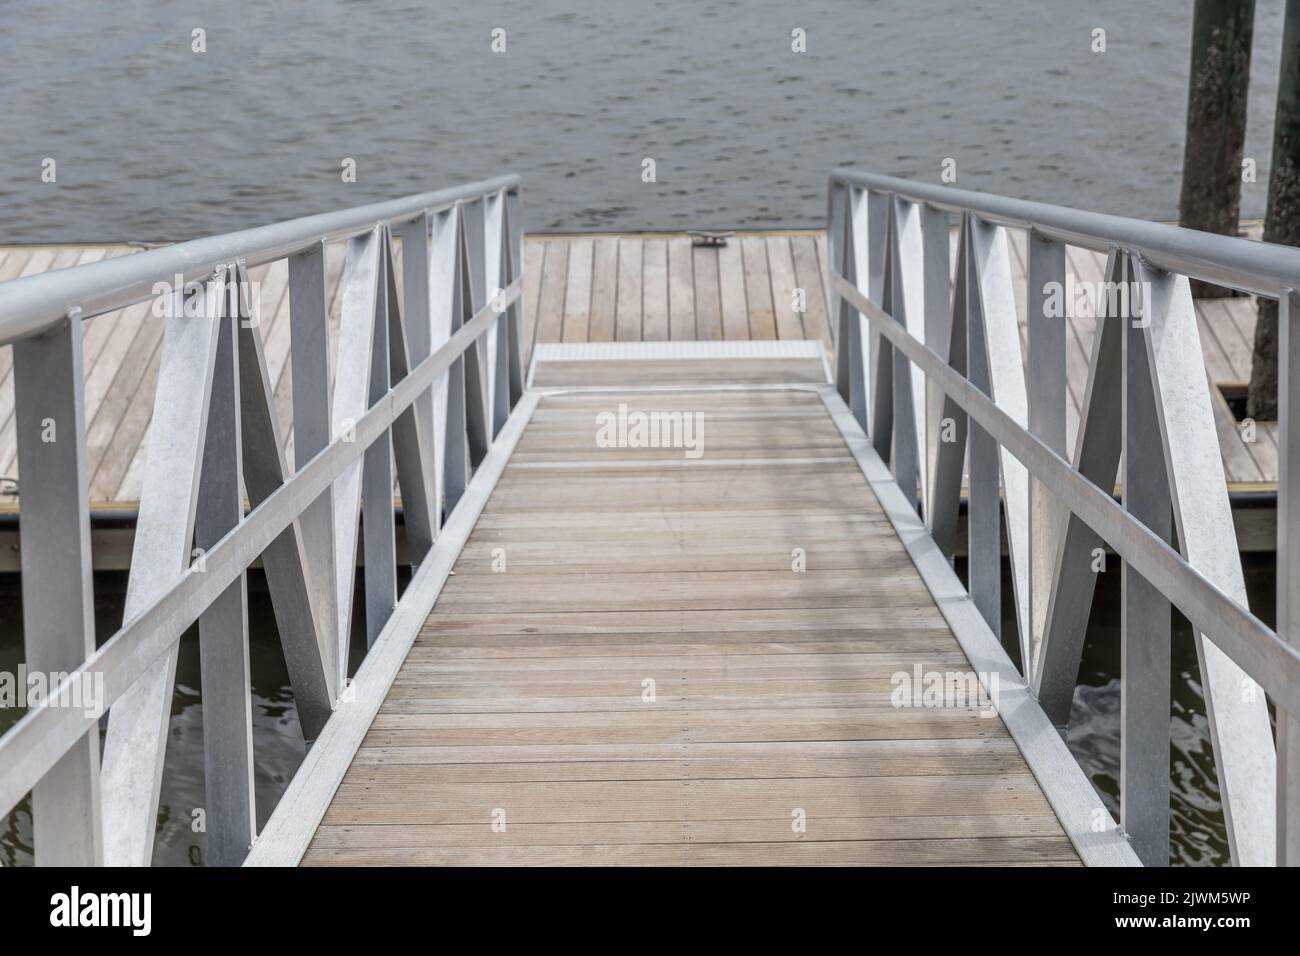 The steep walkway going down to a boat launch pier. Stock Photo